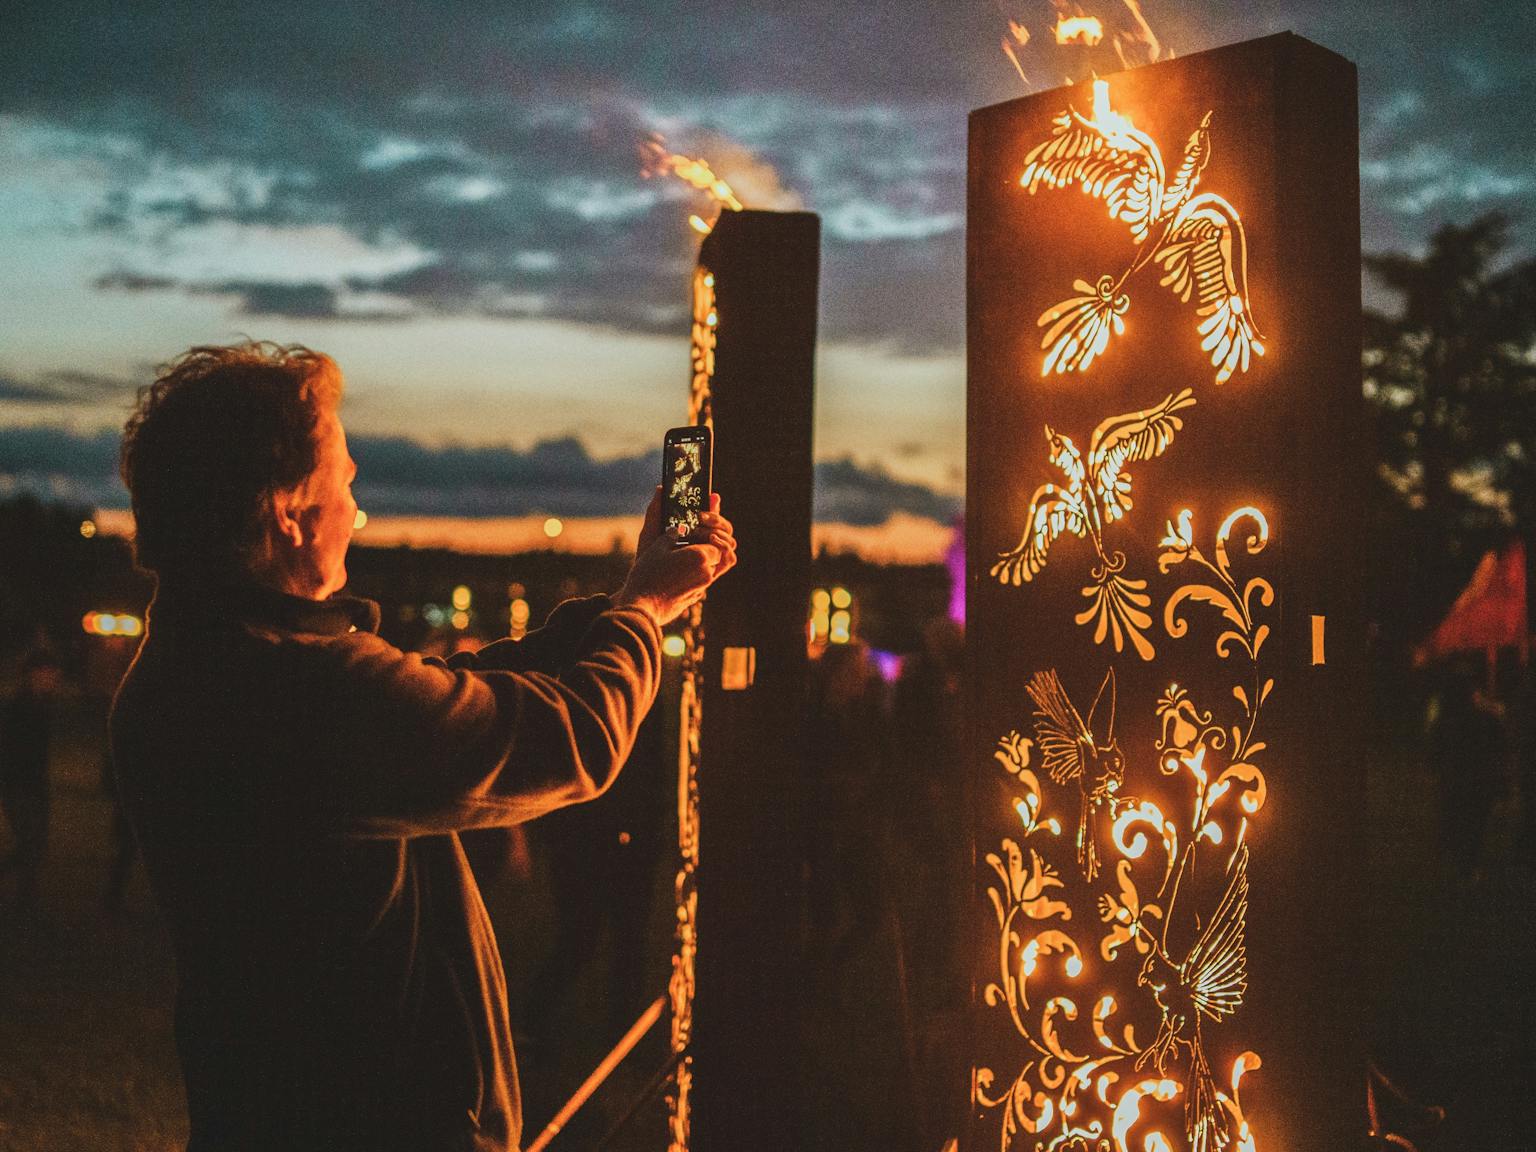 A person taking a photograph of an fire sculpture installation 